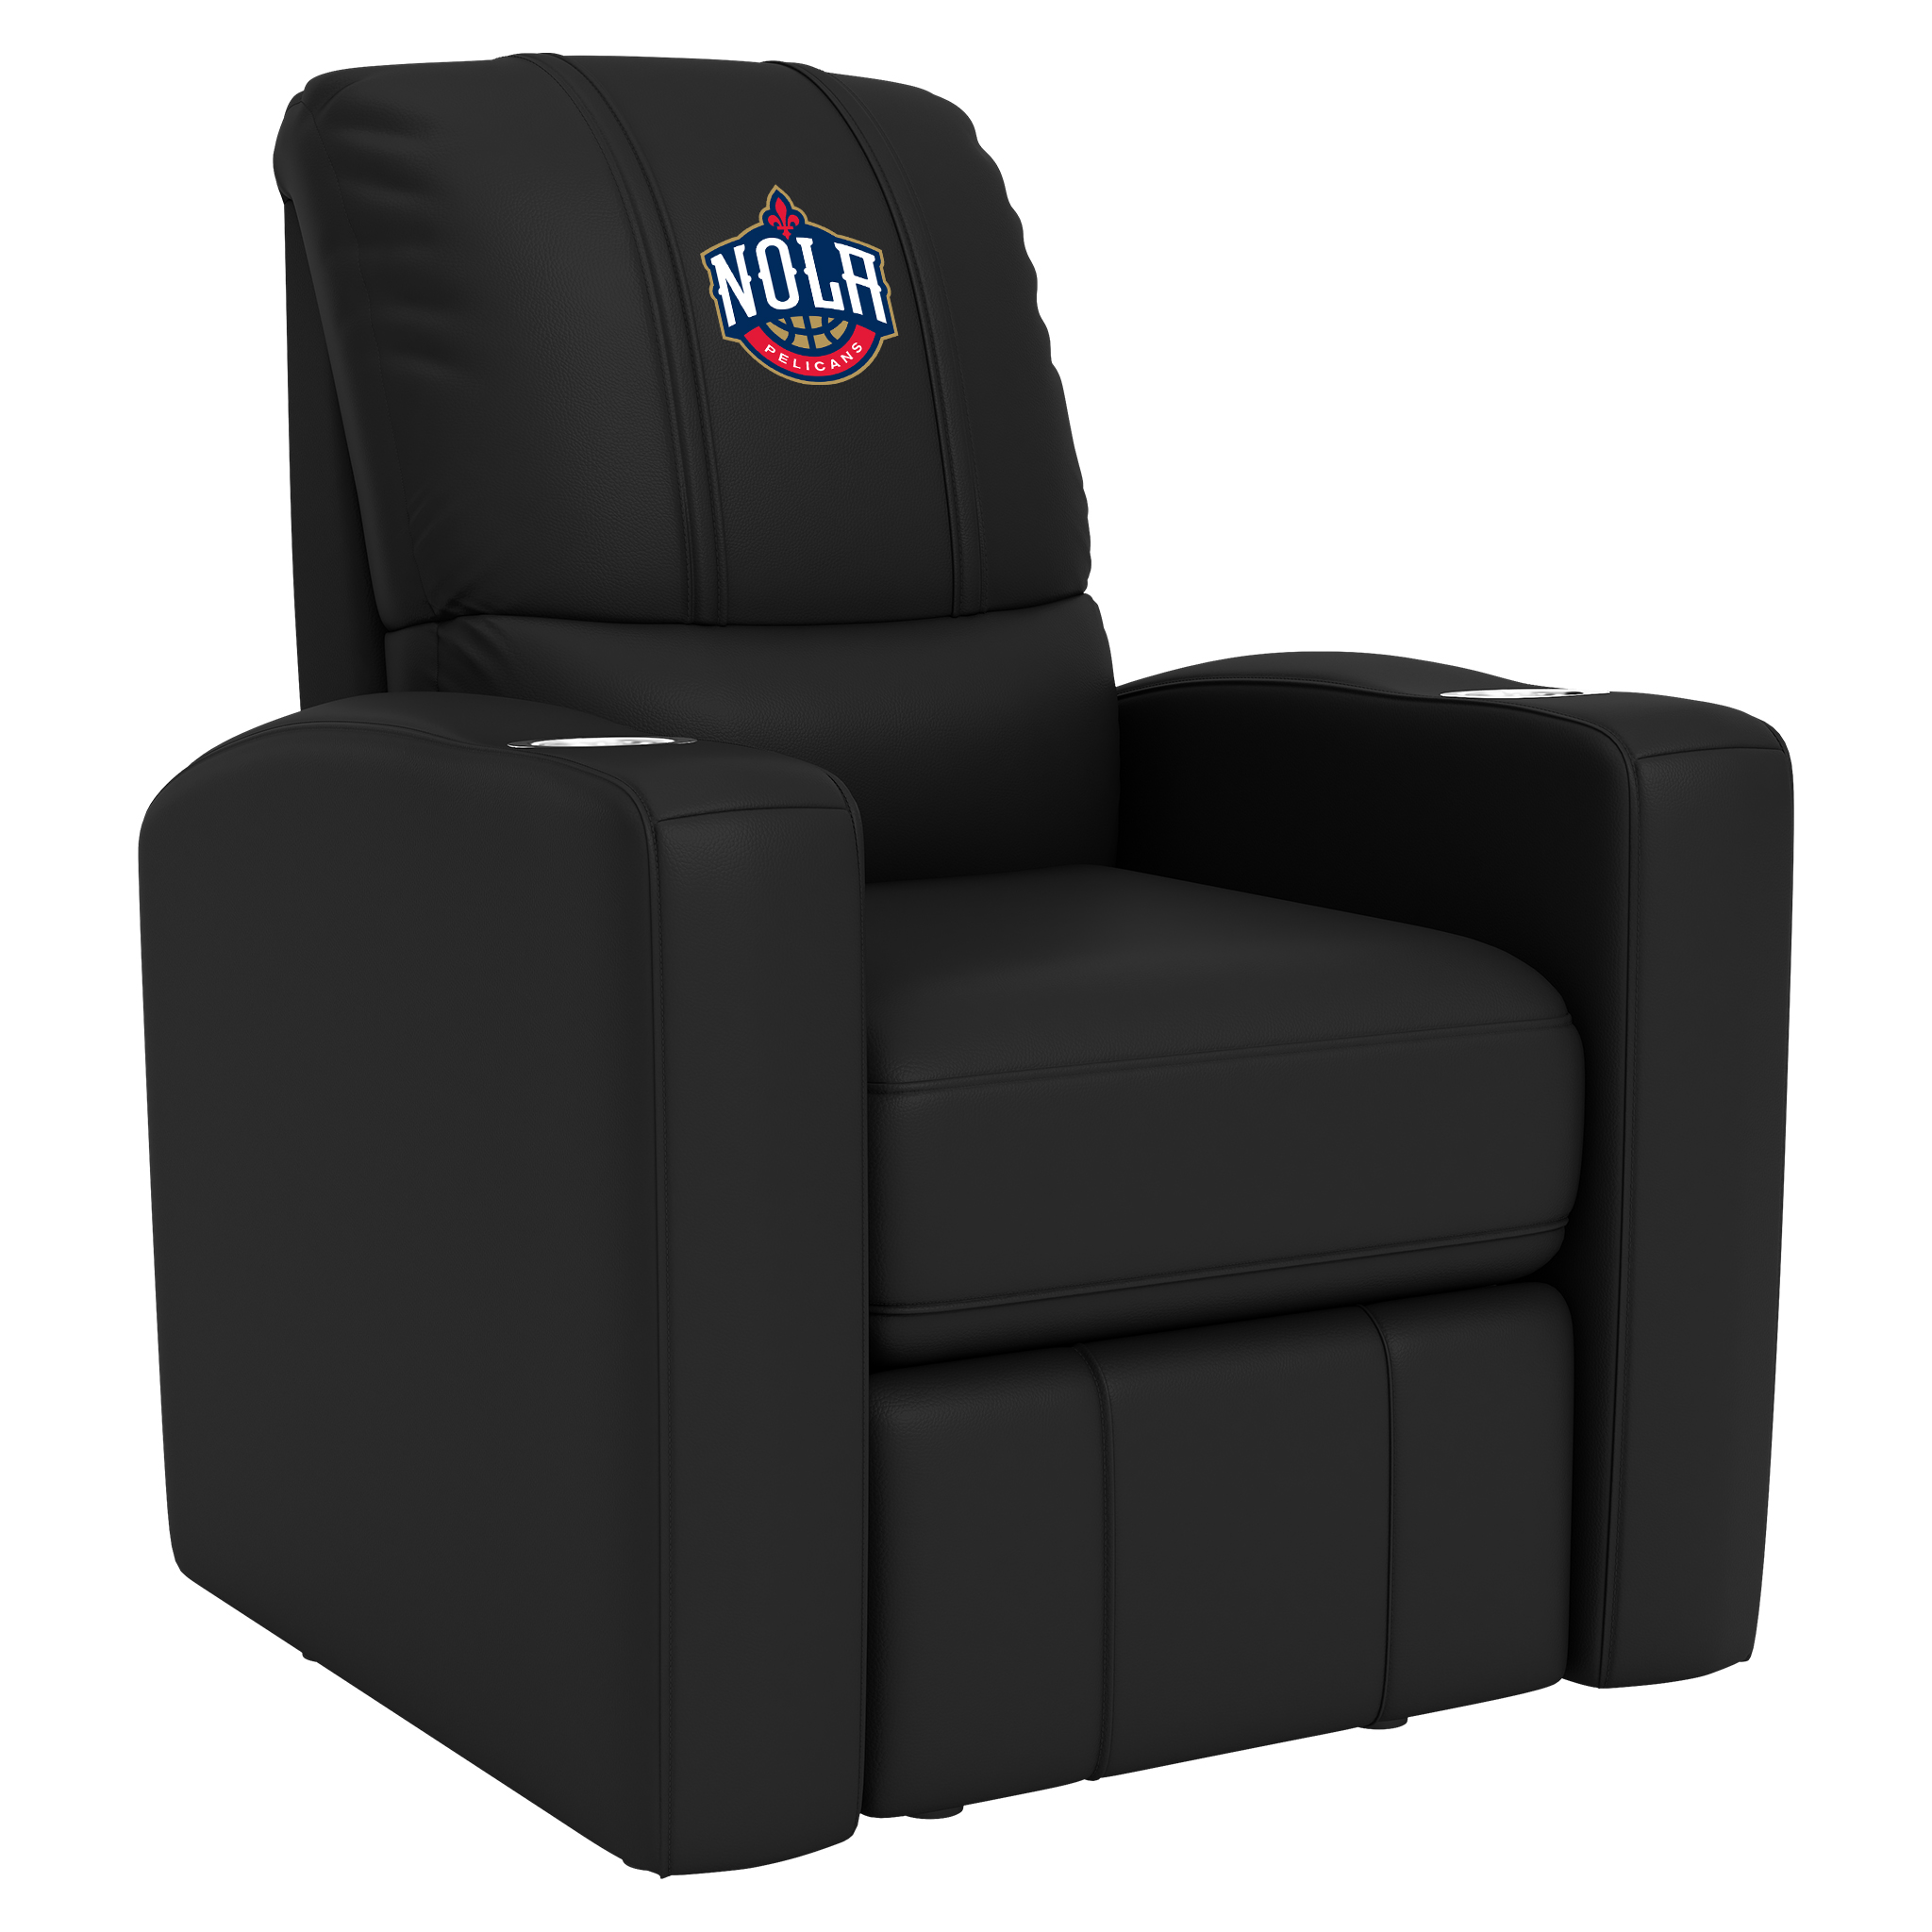 New Orleans Pelicans Stealth Recliner with New Orleans Pelicans Nola